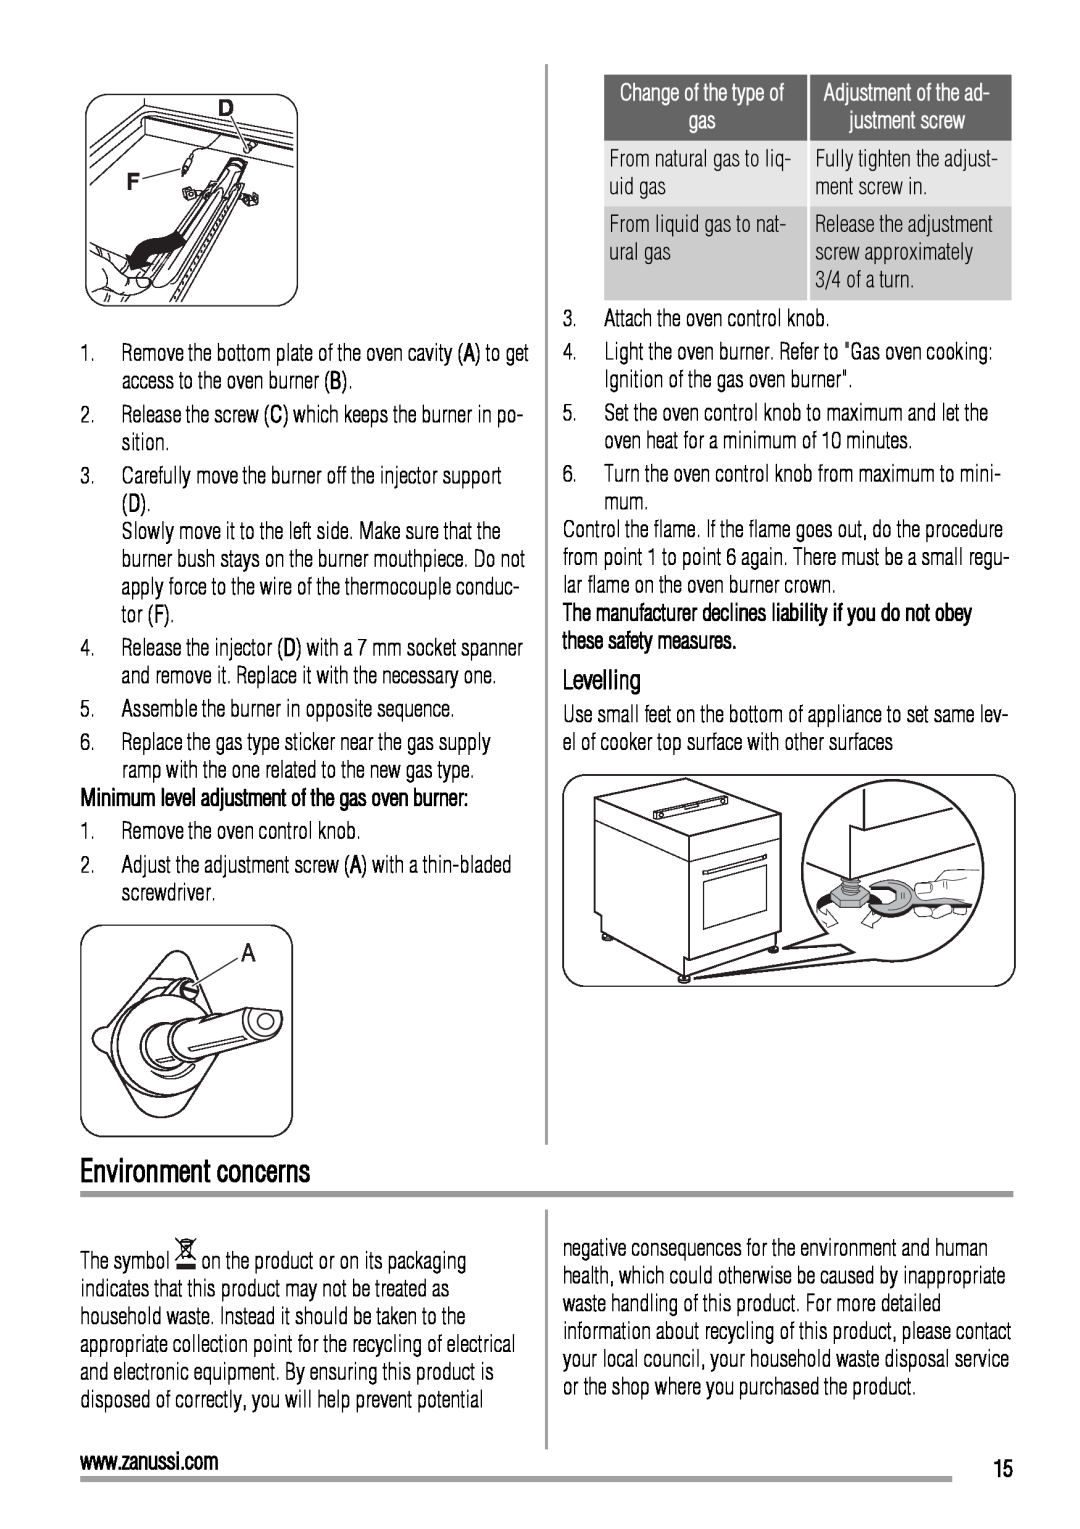 Zanussi ZCG560G user manual Environment concerns, Levelling, Adjustment of the ad justment screw 